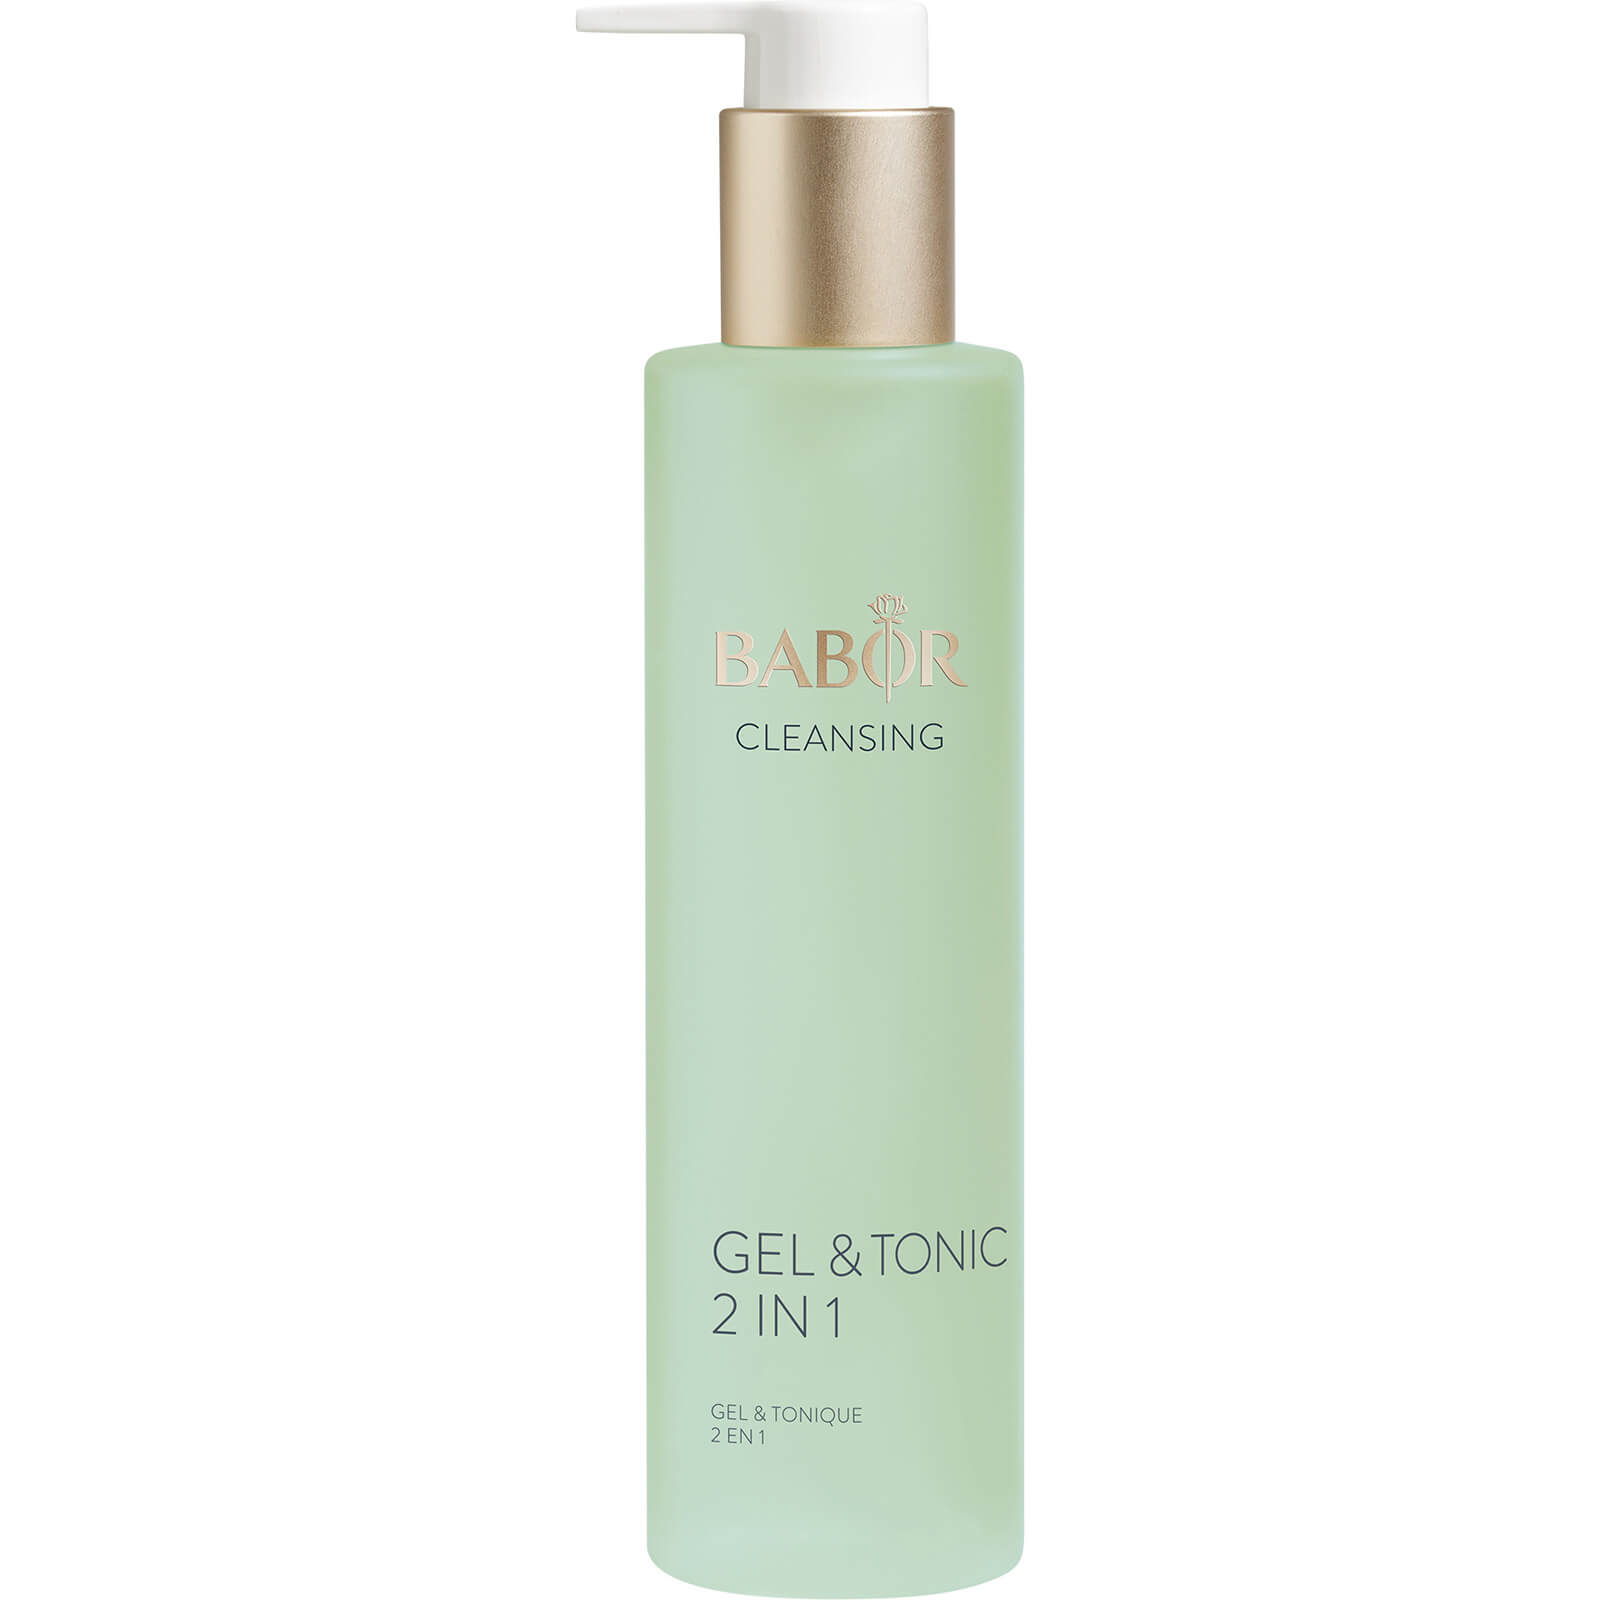 BABOR Cleansing 2-in-1 Gel and Tonic 200ml lookfantastic.com imagine